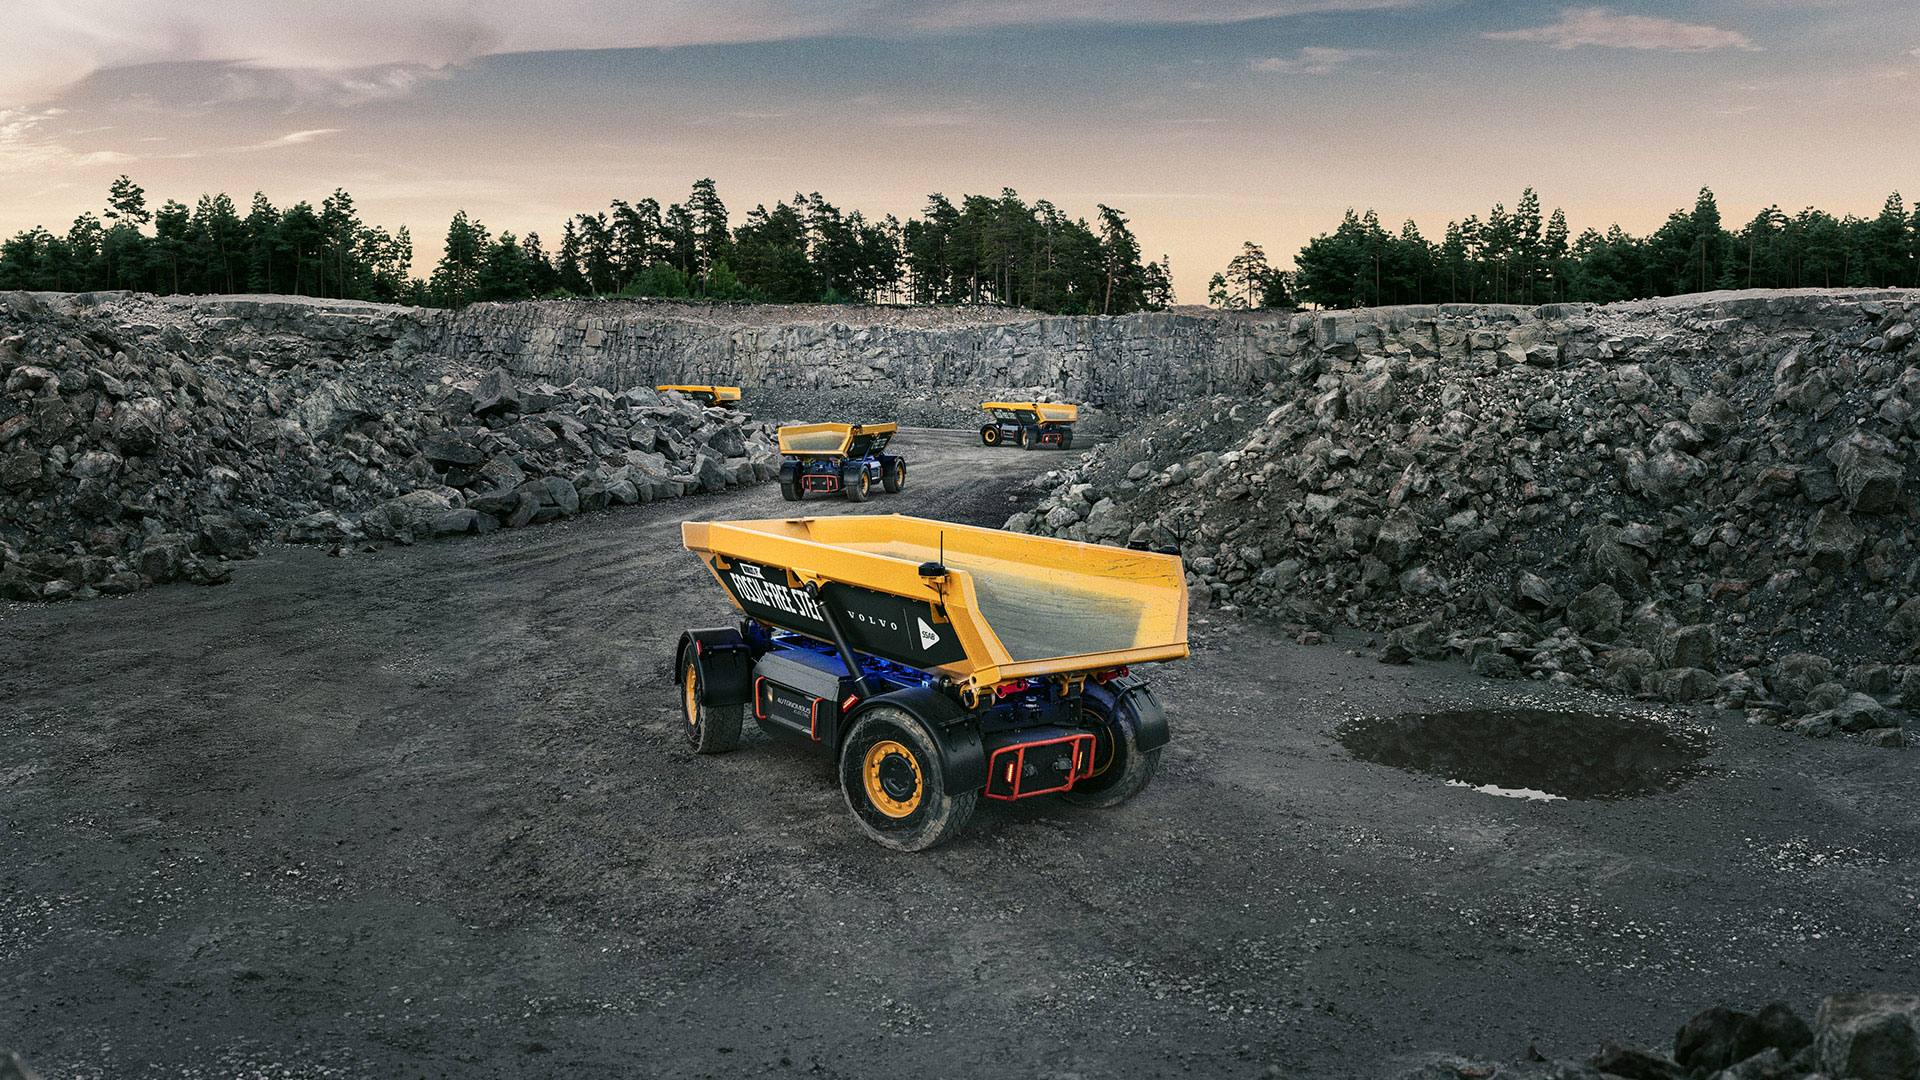 The Volvo Group has unveiled the first ever vehicle to be made of SSAB’s fossil-free steel. The new load carrier represents the first step towards a decarbonized future. 